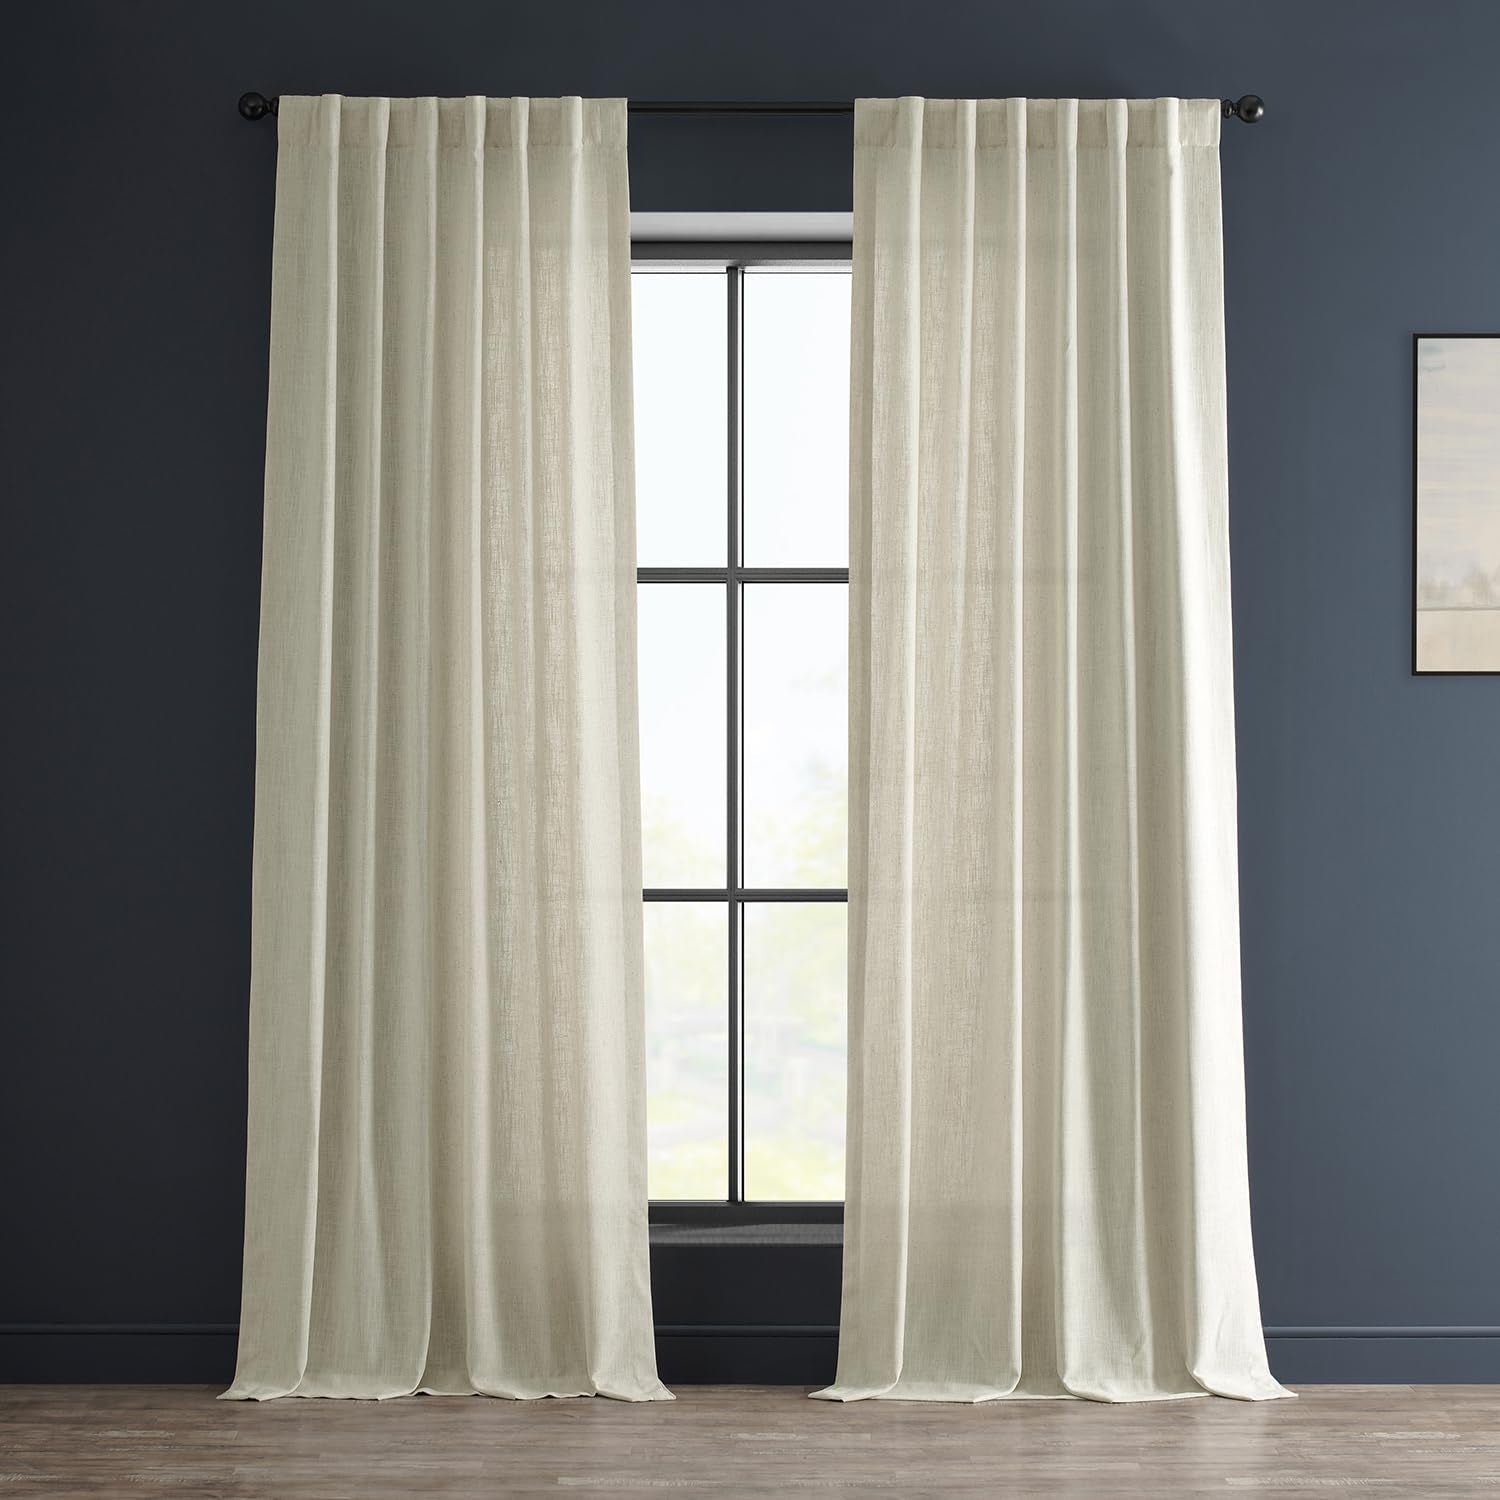 HPD Half Price Drapes Semi Sheer Faux Linen Curtains for Bedroom 96 Inches Long Light Filtering Living Room Window Curtain (1 Panel), 50W X 96L, Rice White  EFF Barley 50W X 120L 